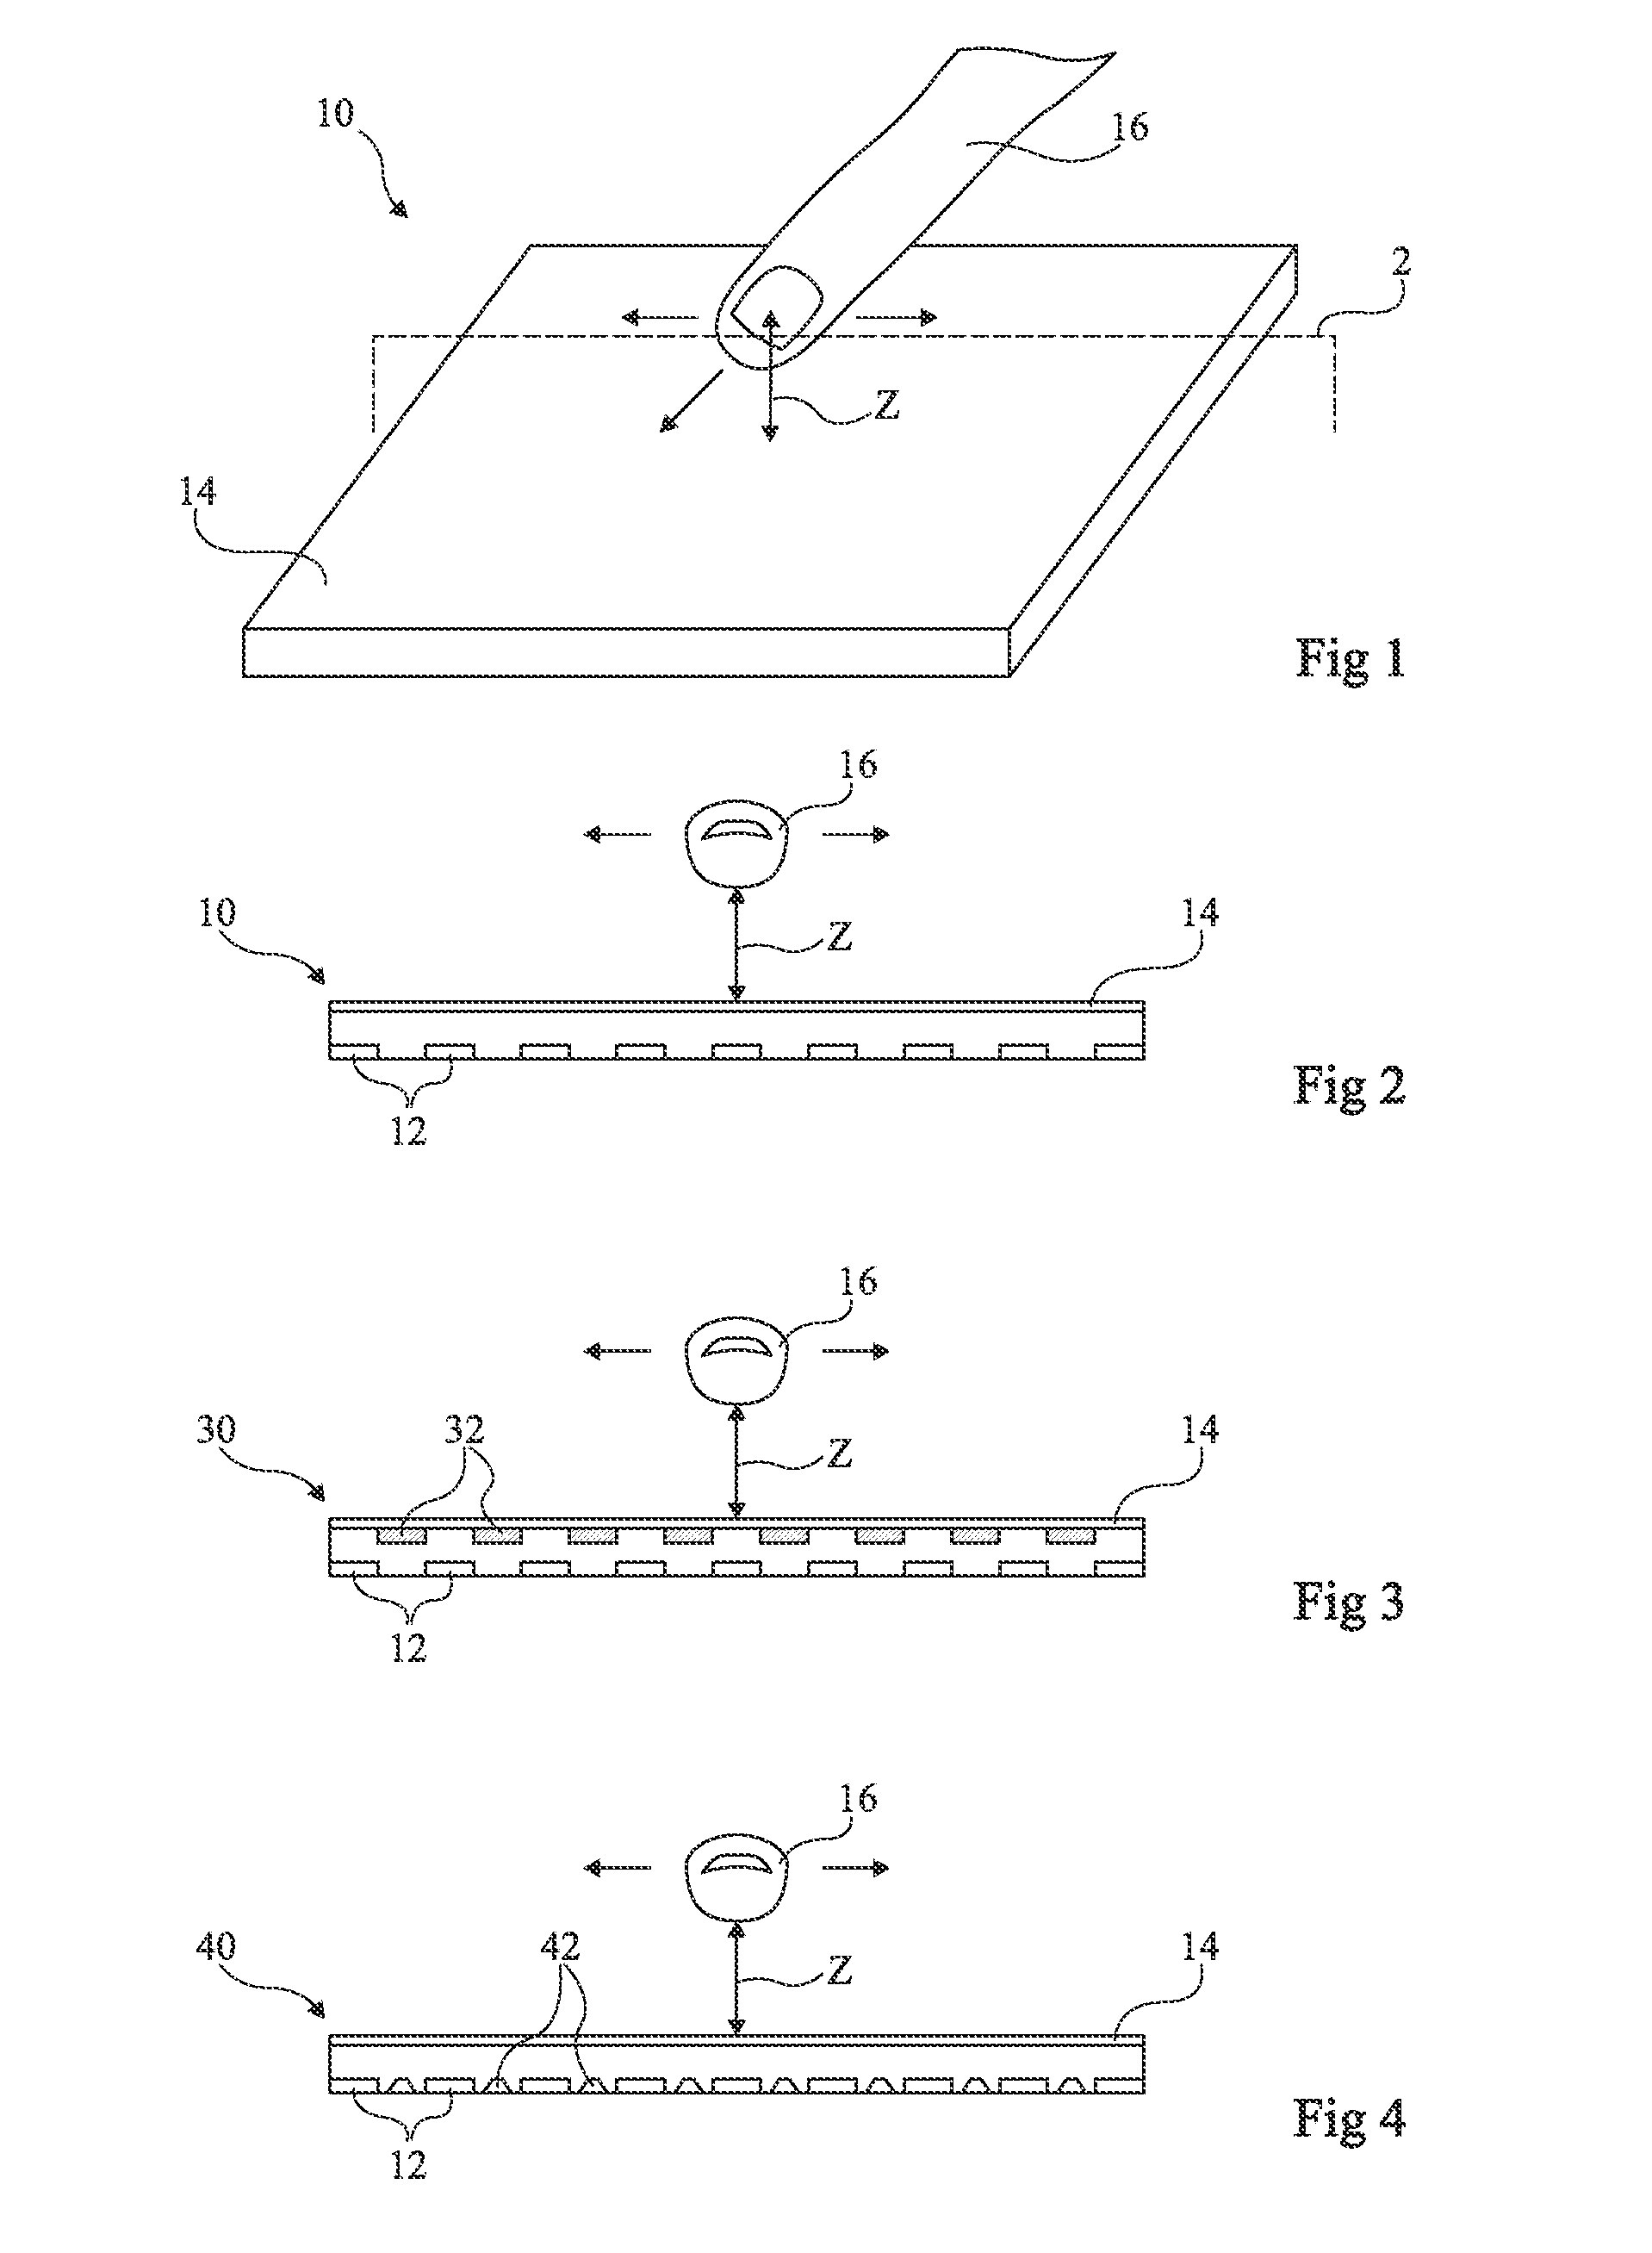 Contactless user interface having organic semiconductor components